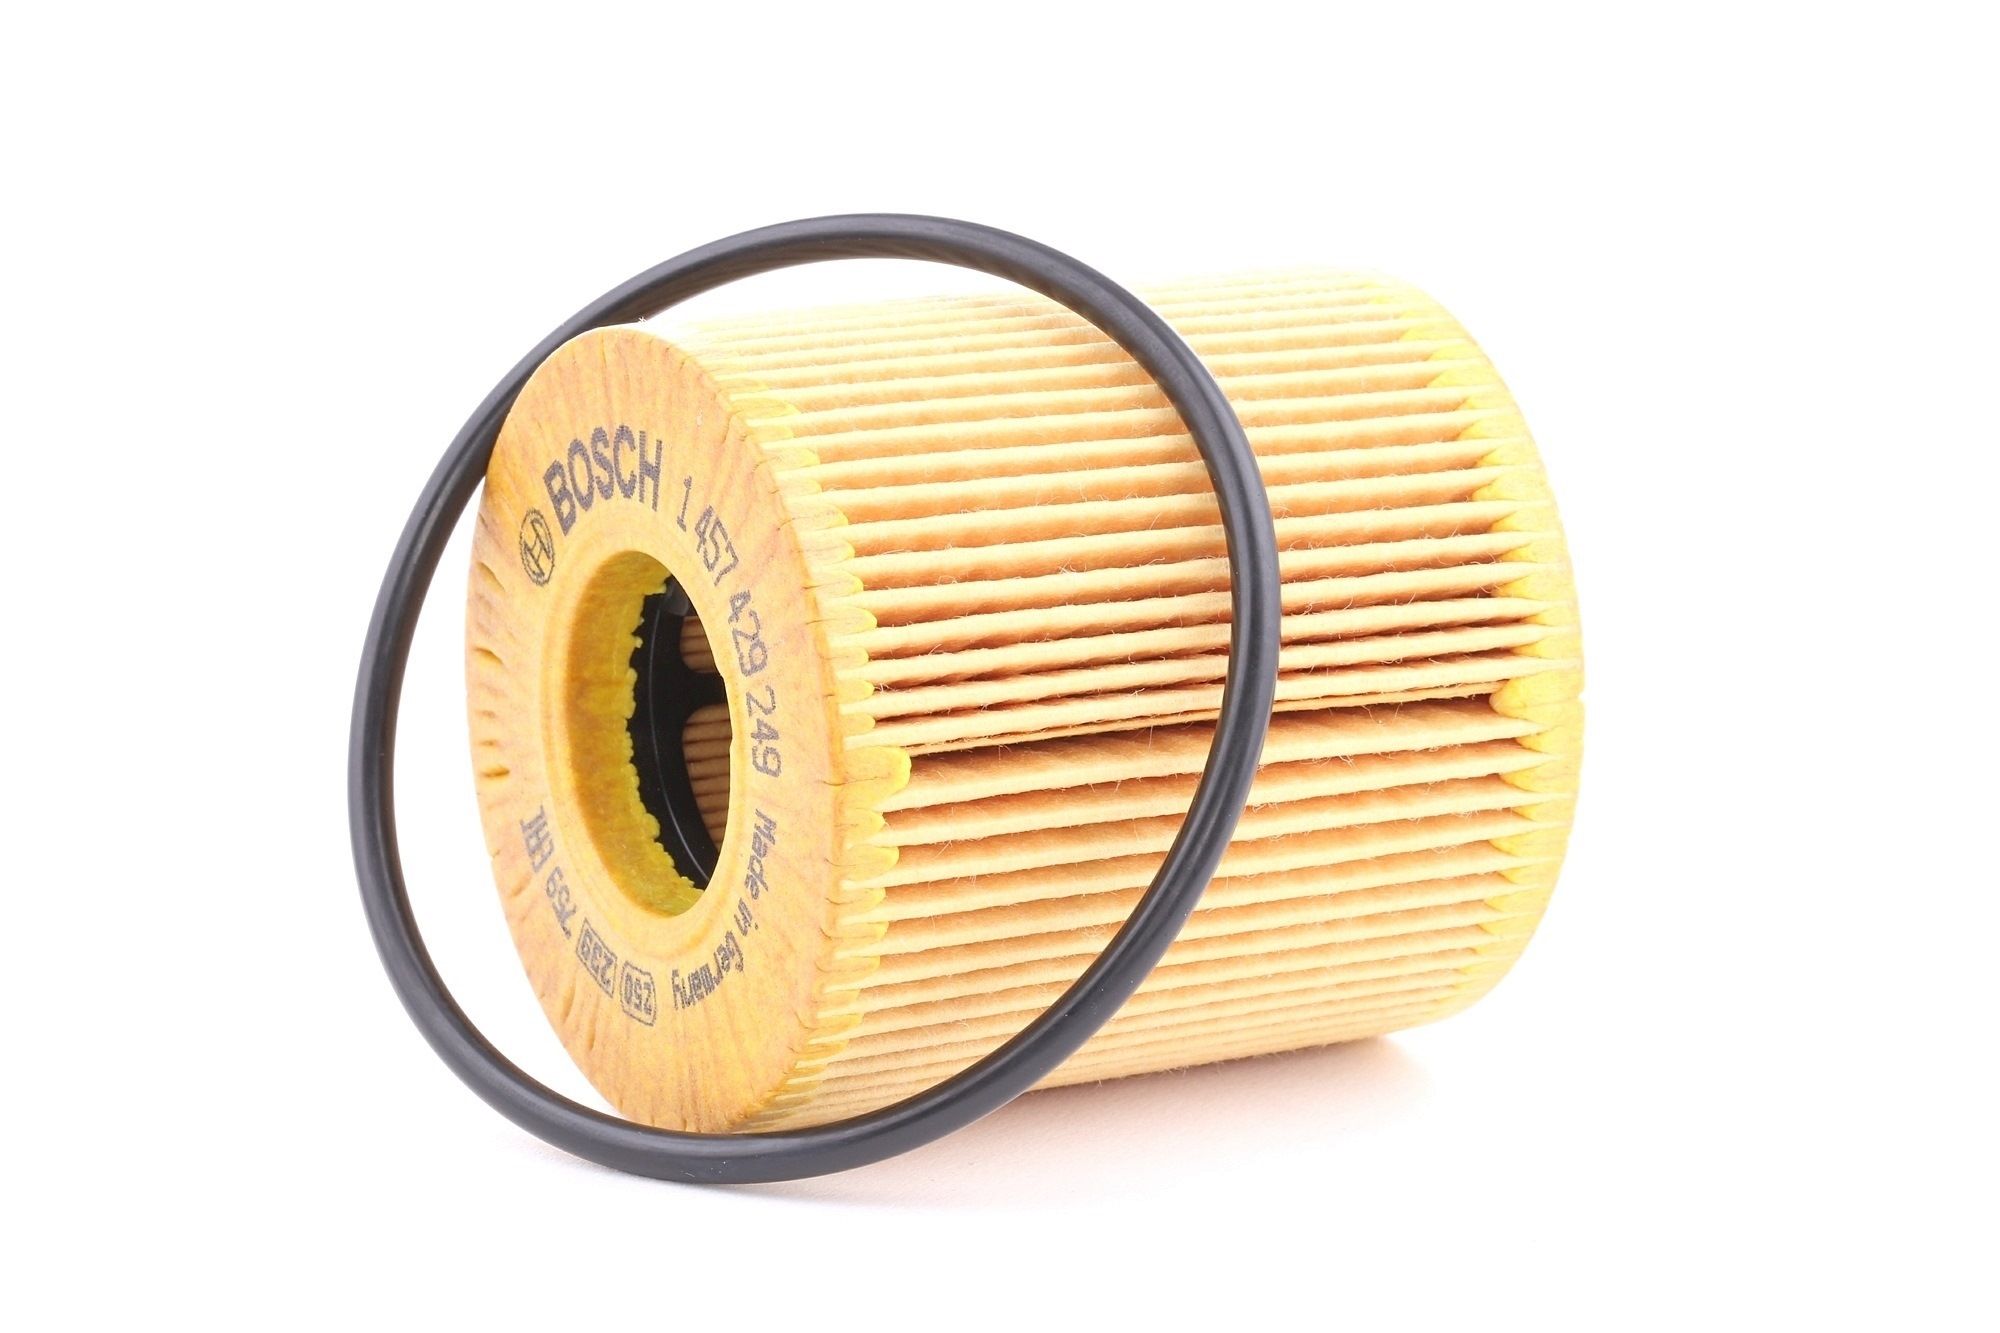 Fiat Oil filter BOSCH P 9249 at a good price